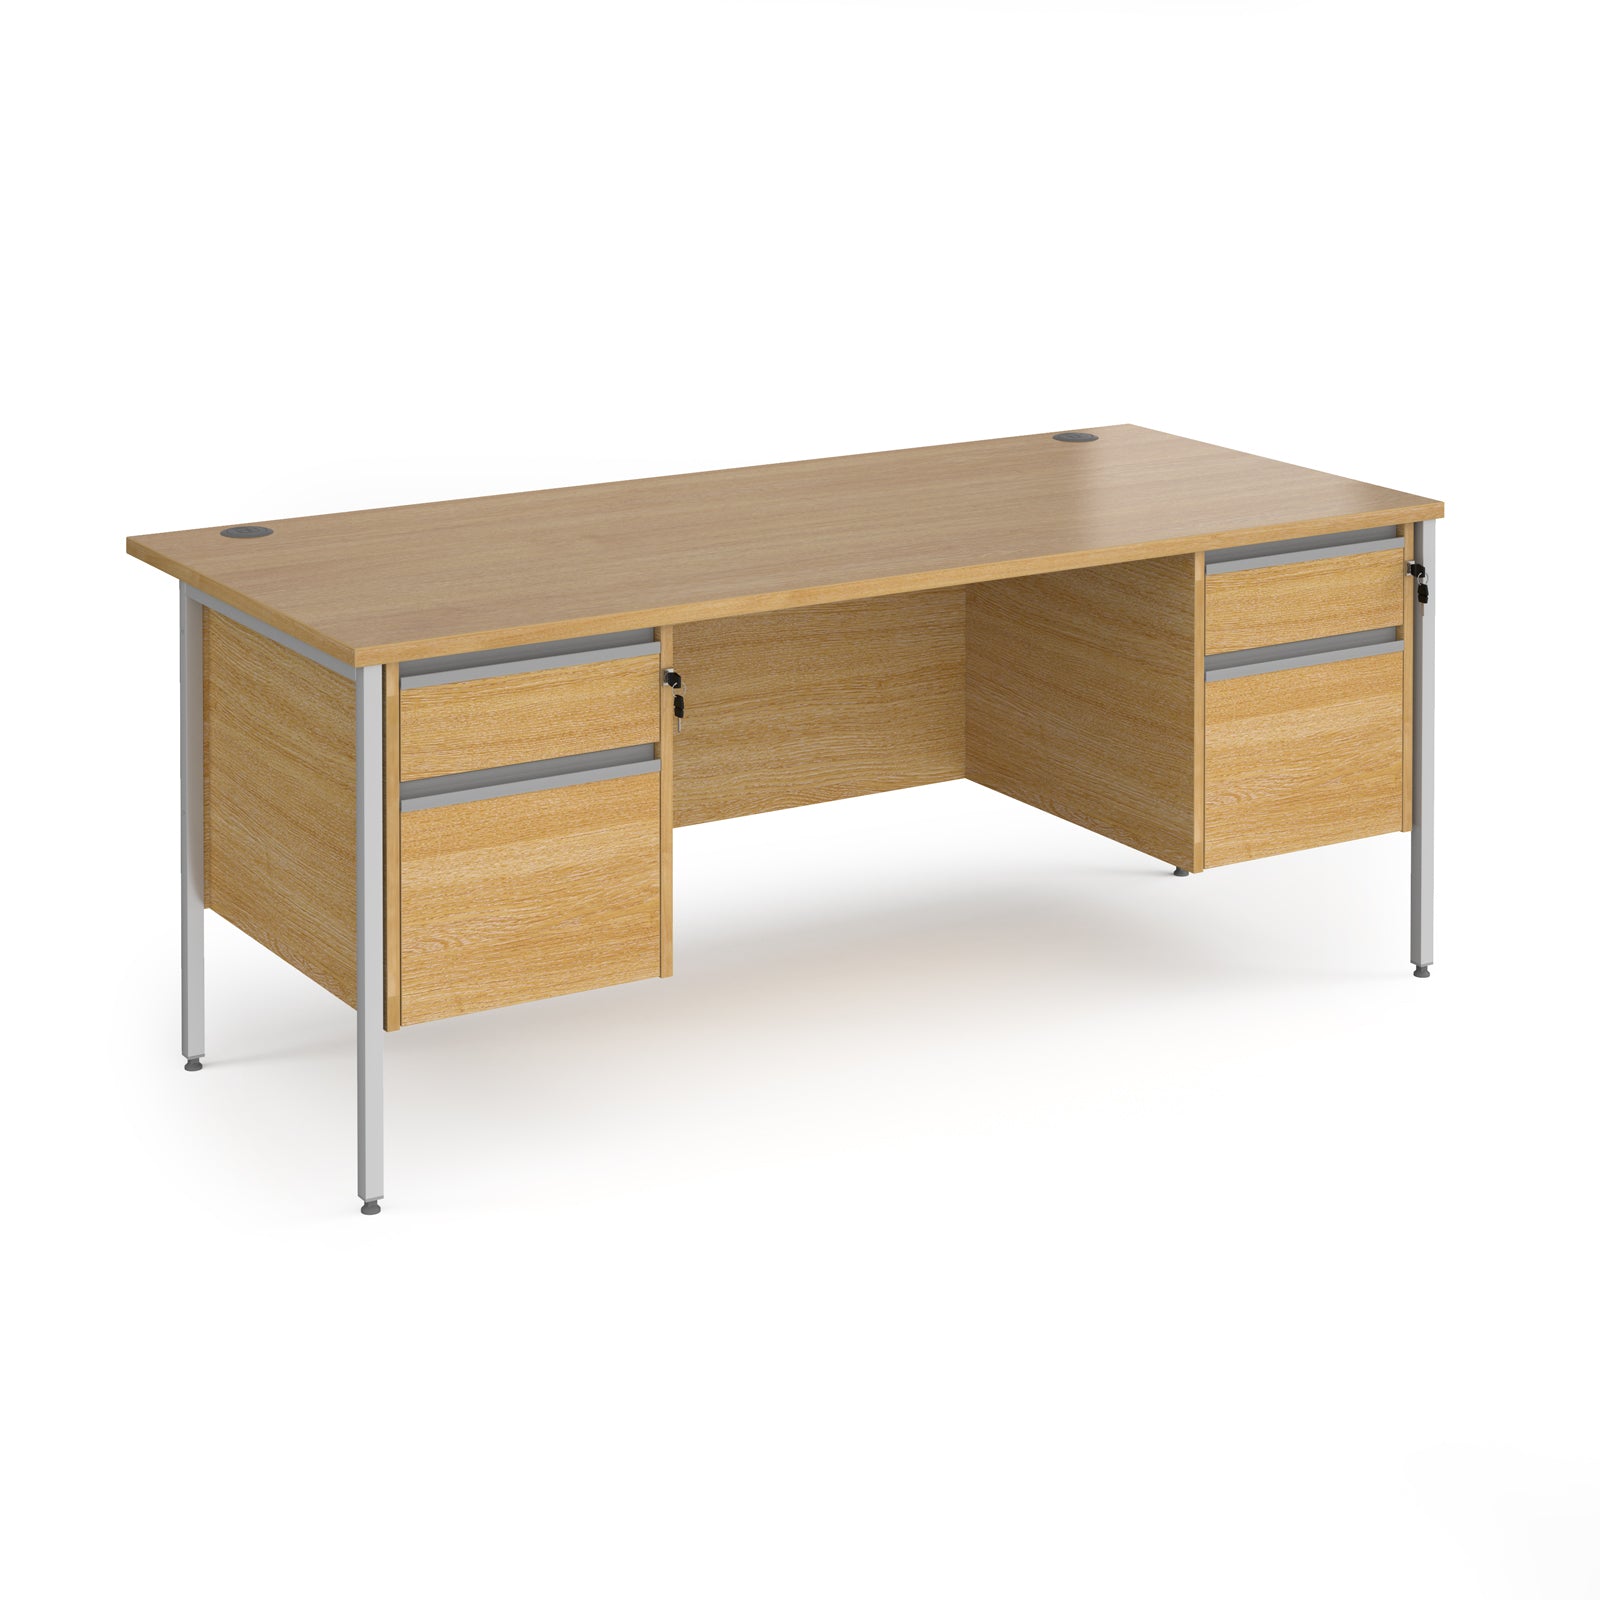 Chicago 25 Desk with H-Frame Legs - 2 and 2 Pedestals